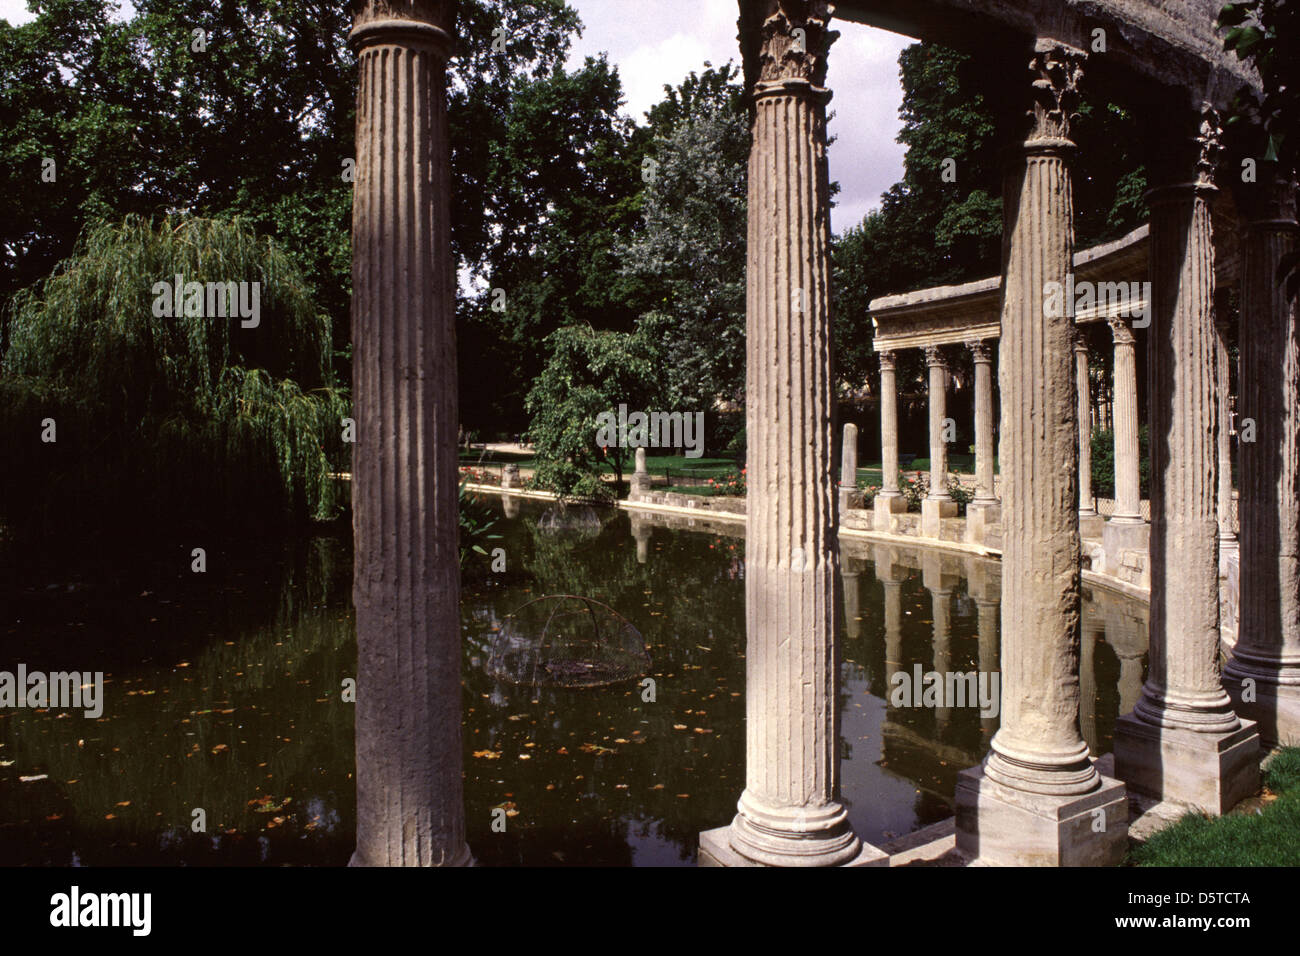 Colonnade beside Naumachia basin in Parc de Monceau park situated in the 8th and 17th Arrondissements of Paris France Stock Photo